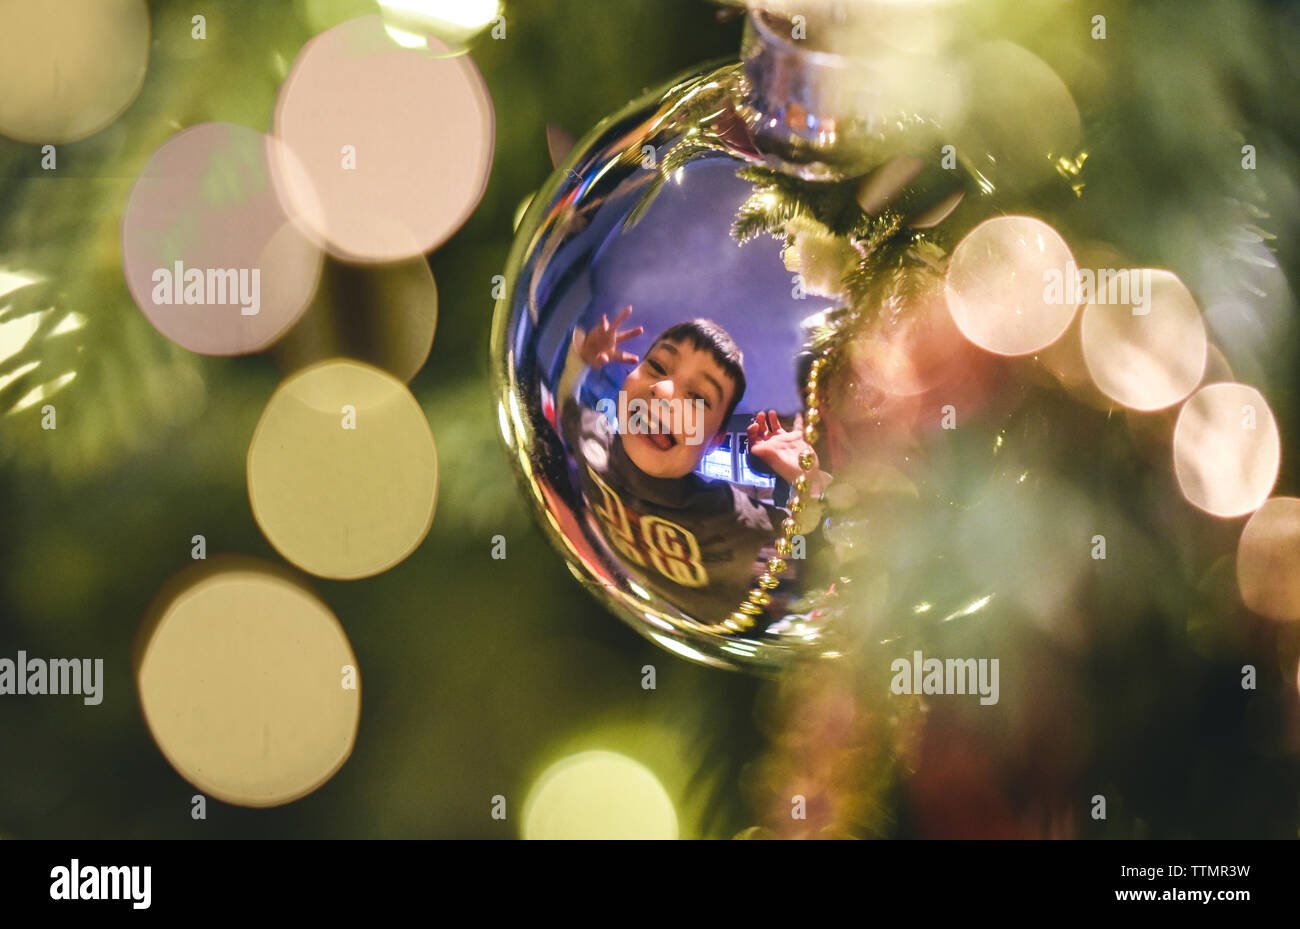 Reflection on silver Christmas ball of young boy making silly face. Stock Photo